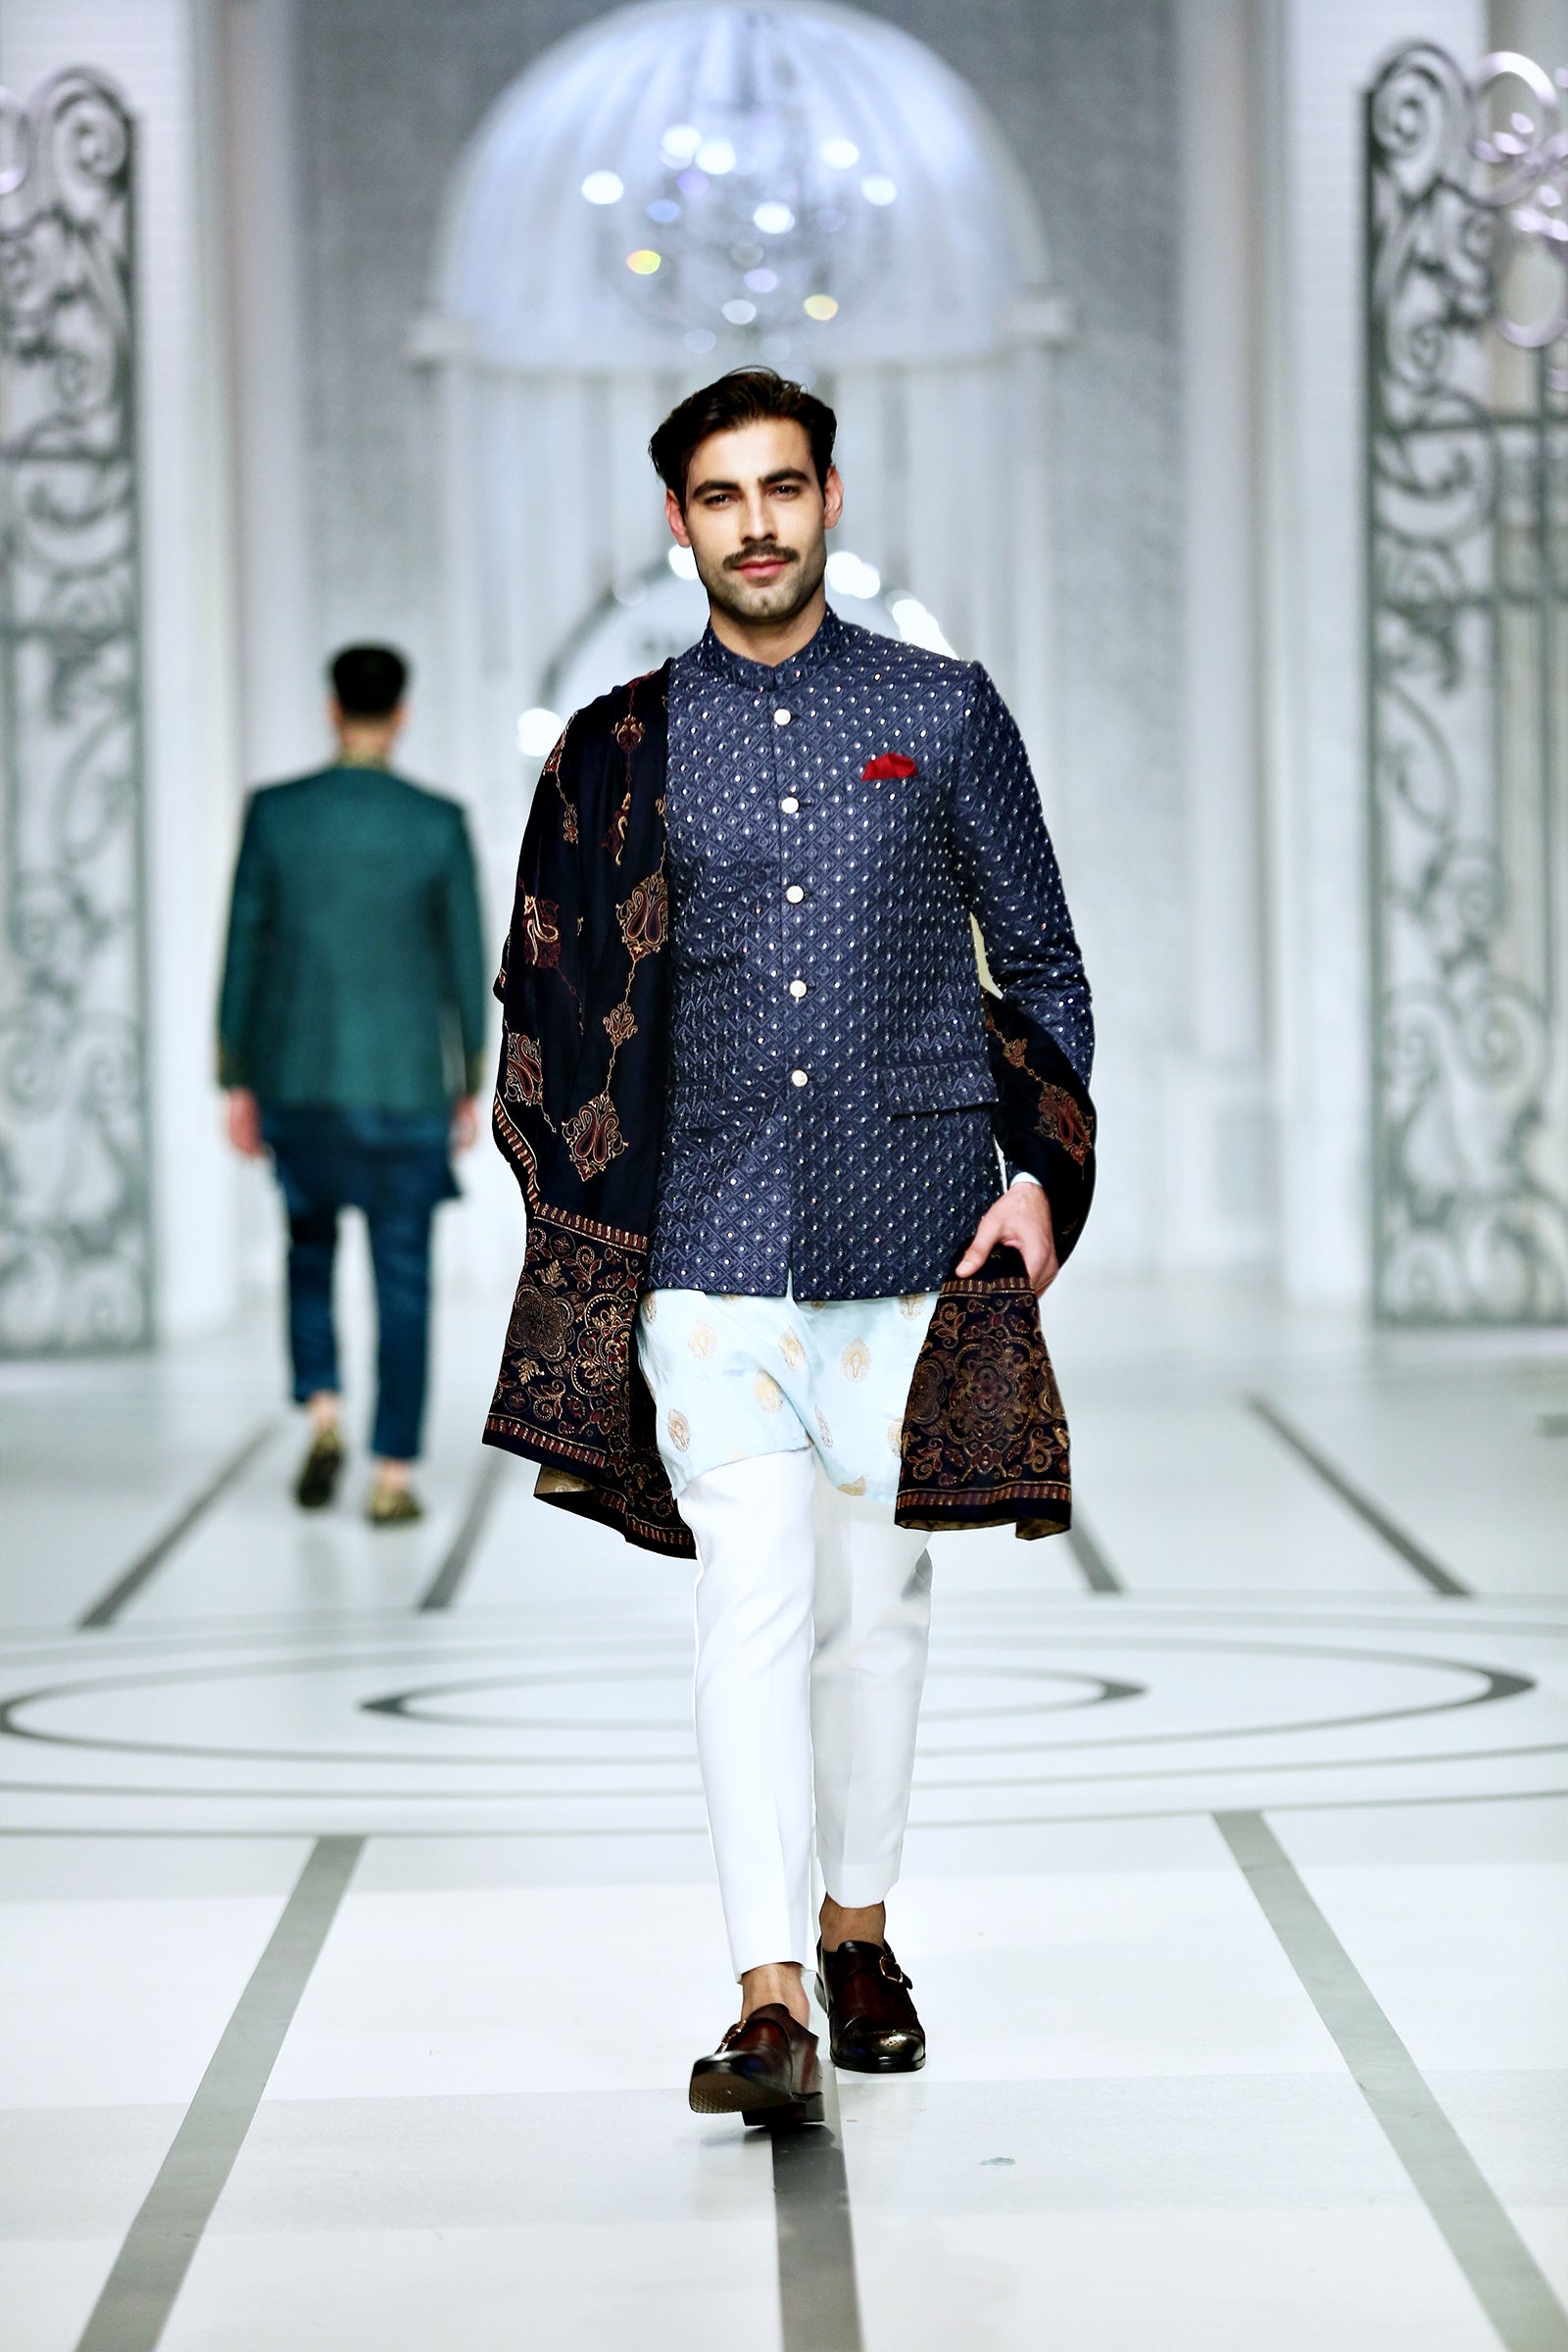 Buy Prince Suit online from Sasya and get delivery Worldwide  sasyafashion